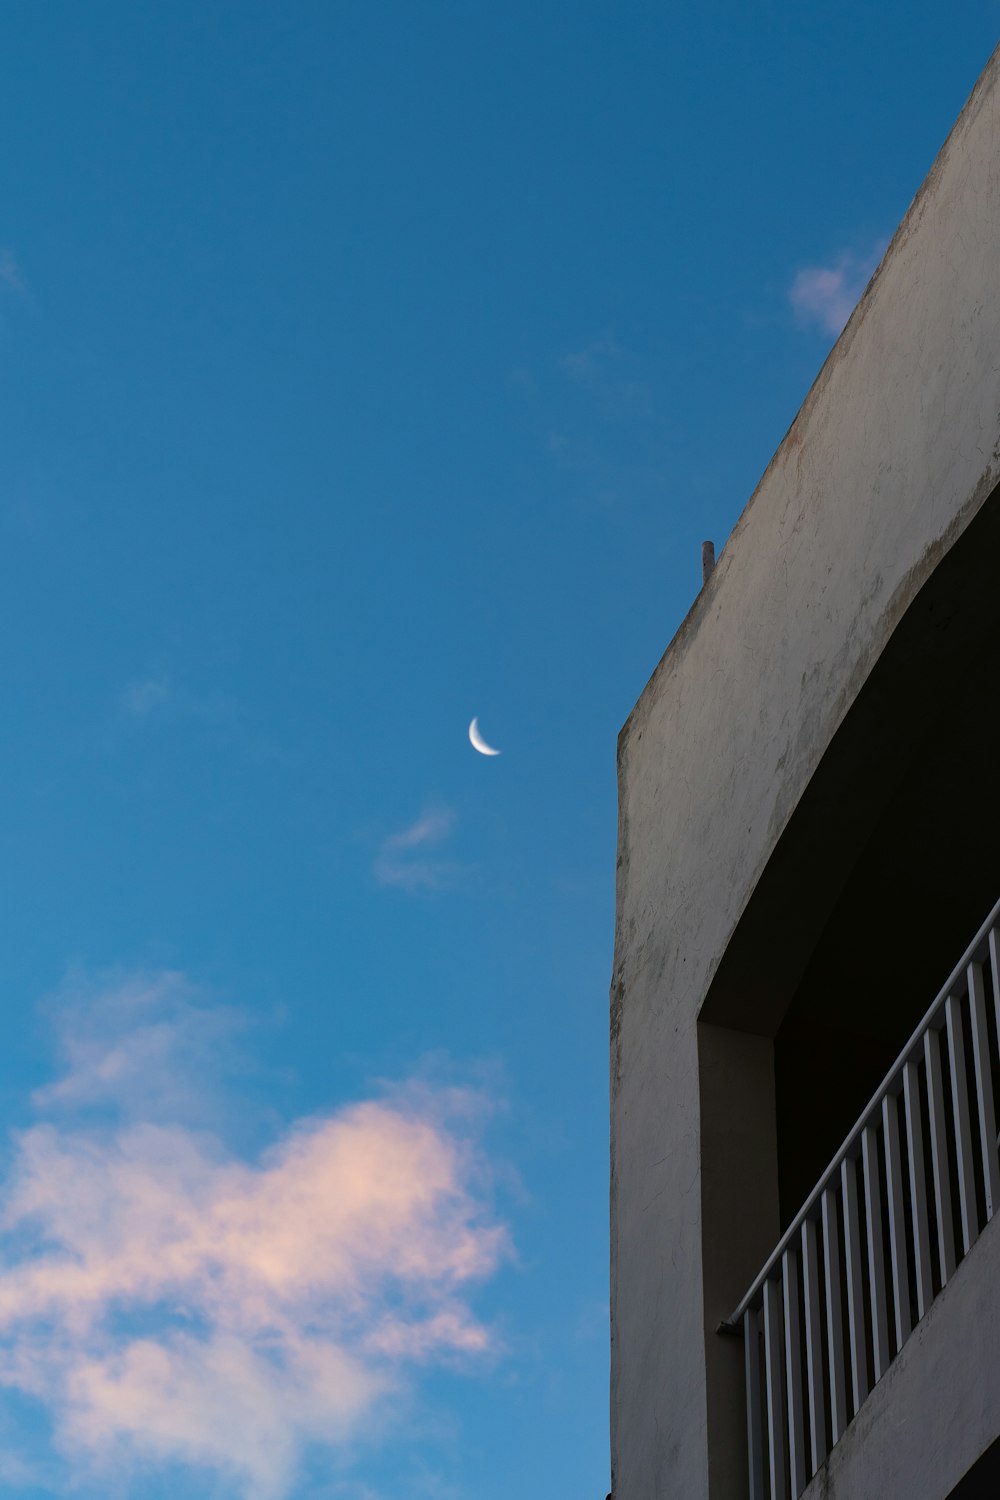 a half moon is seen in the sky above a building